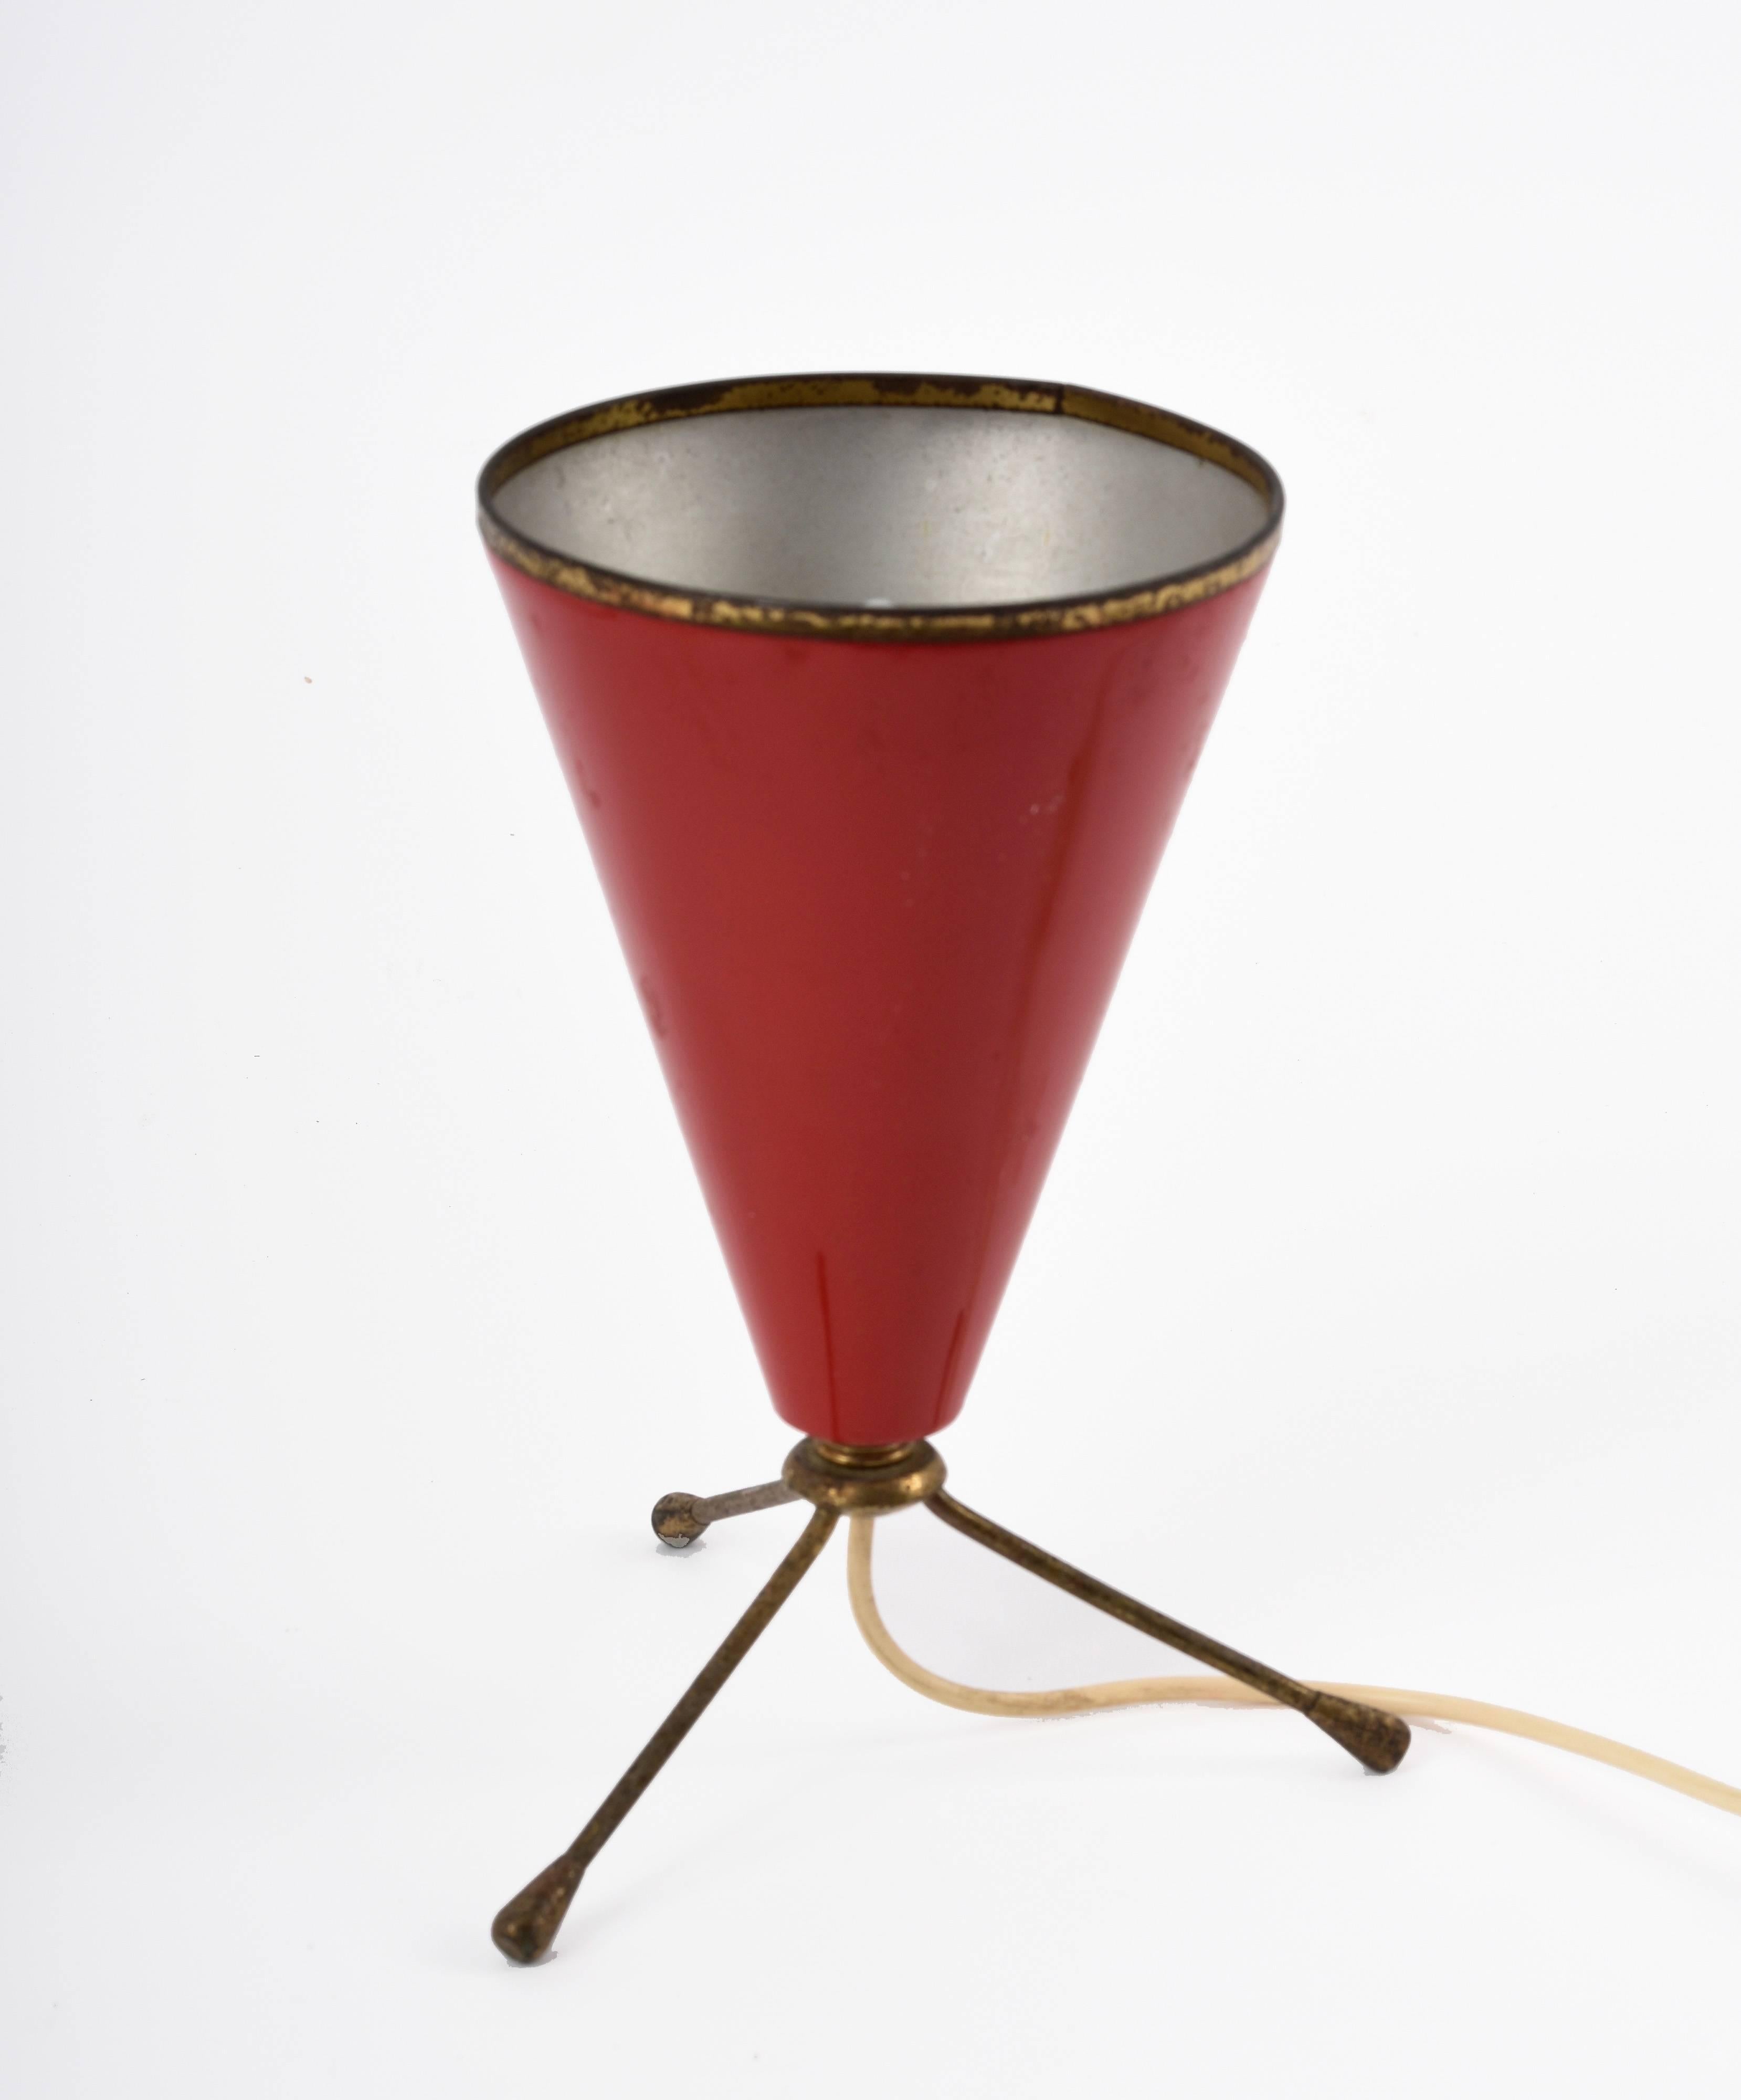 Mid-Century Modern Conical Table Lamp in Red Lacquered Metal and Brass, 1950s Italian Tripode